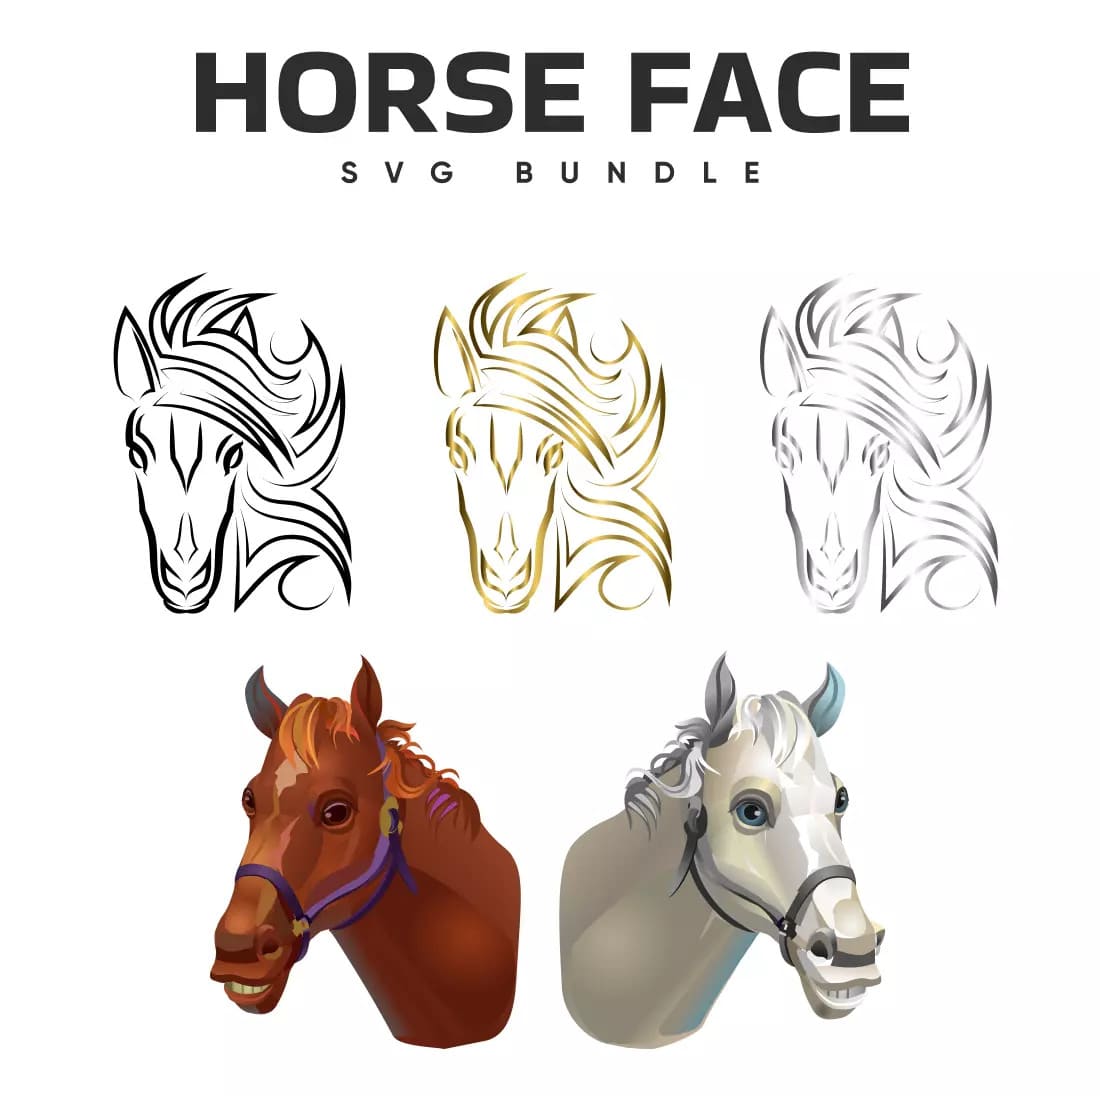 The horse face is shown in three different colors.